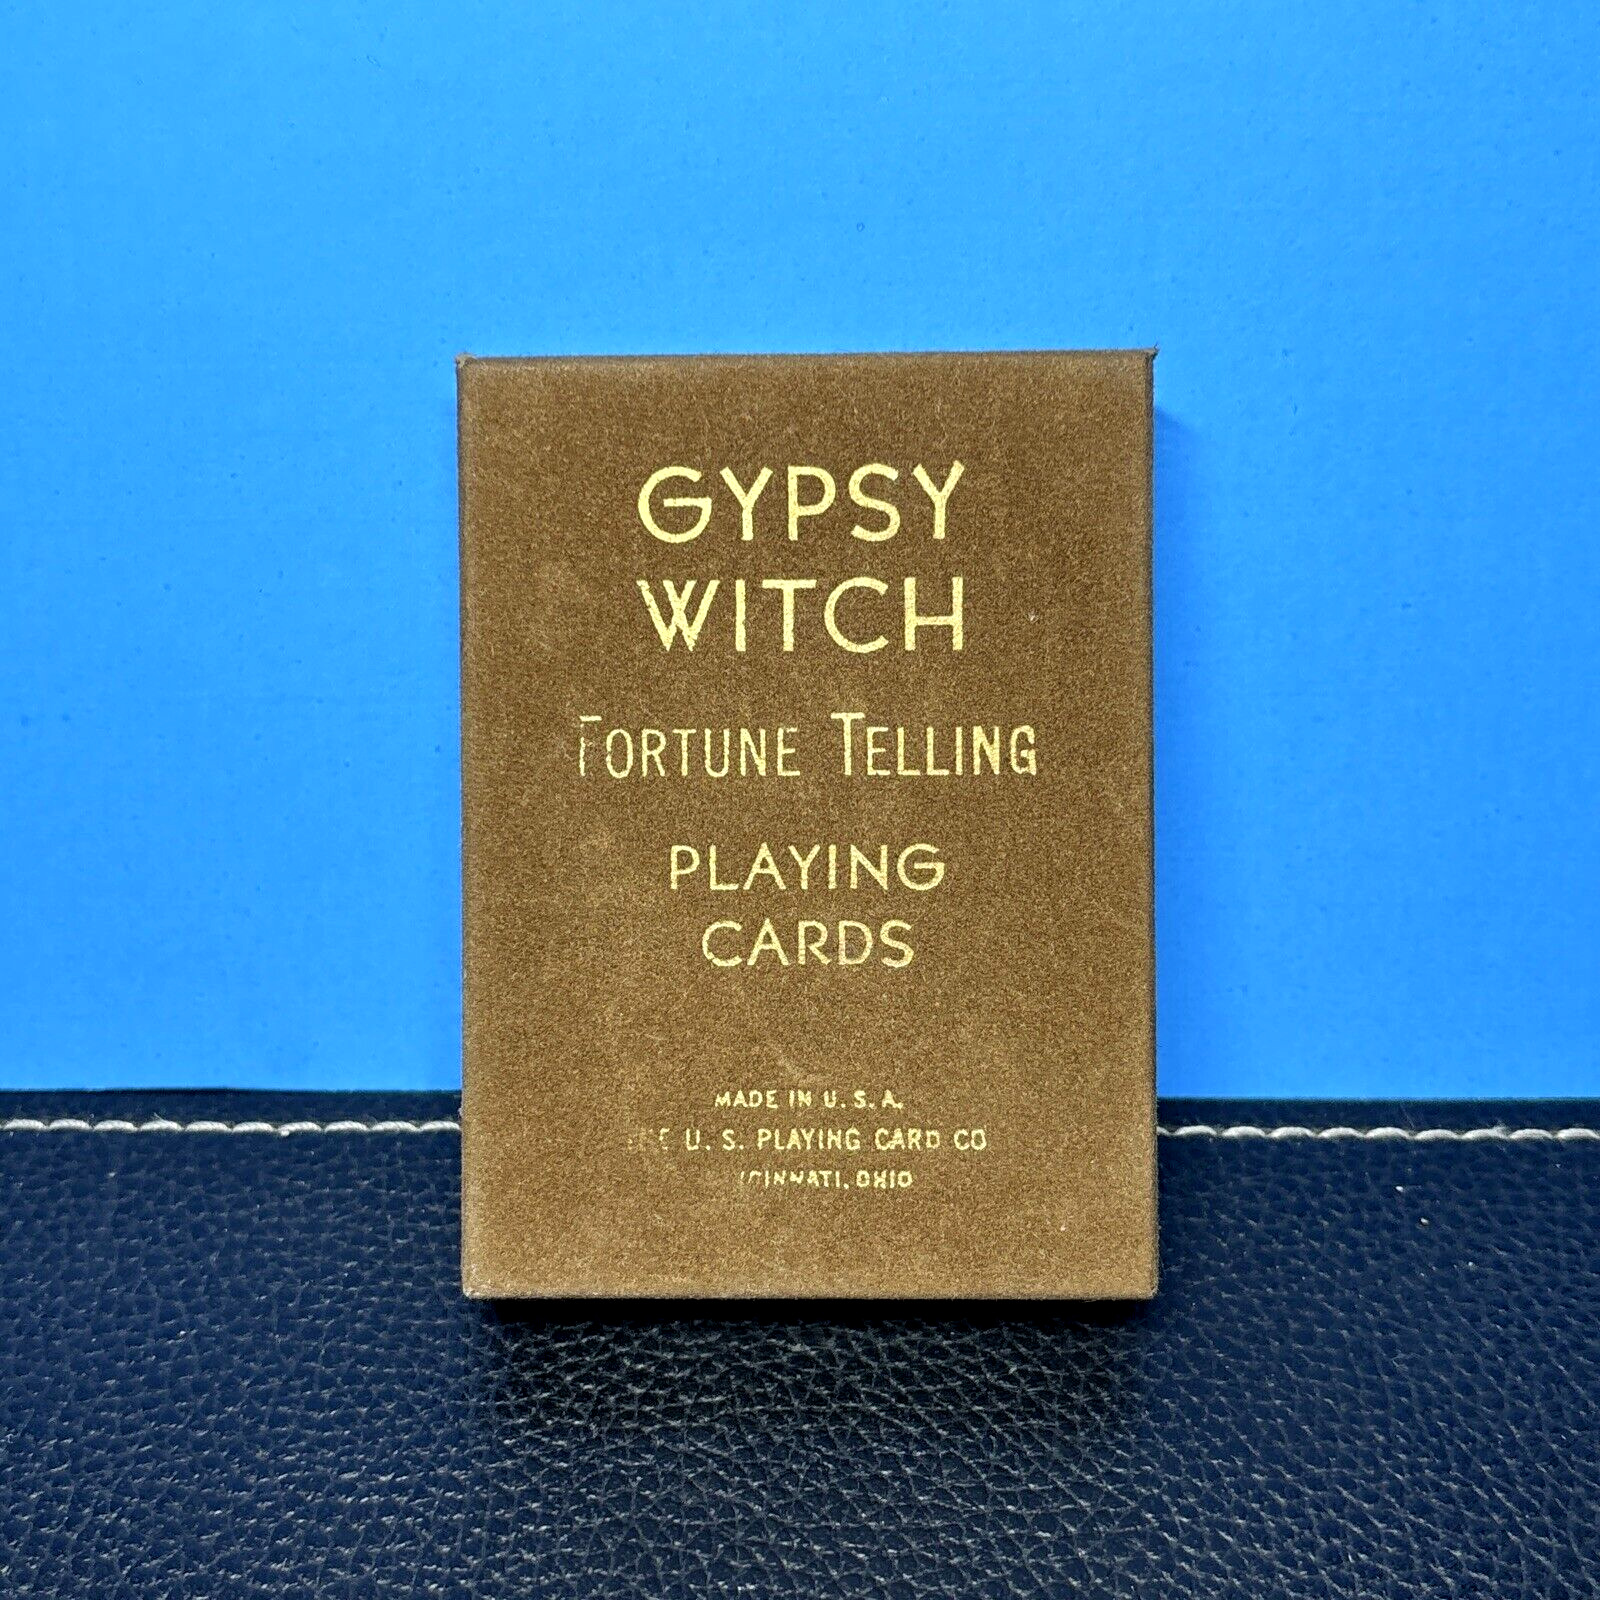 1940's Vintage Gypsy Witch Fortune Telling Playing Cards.